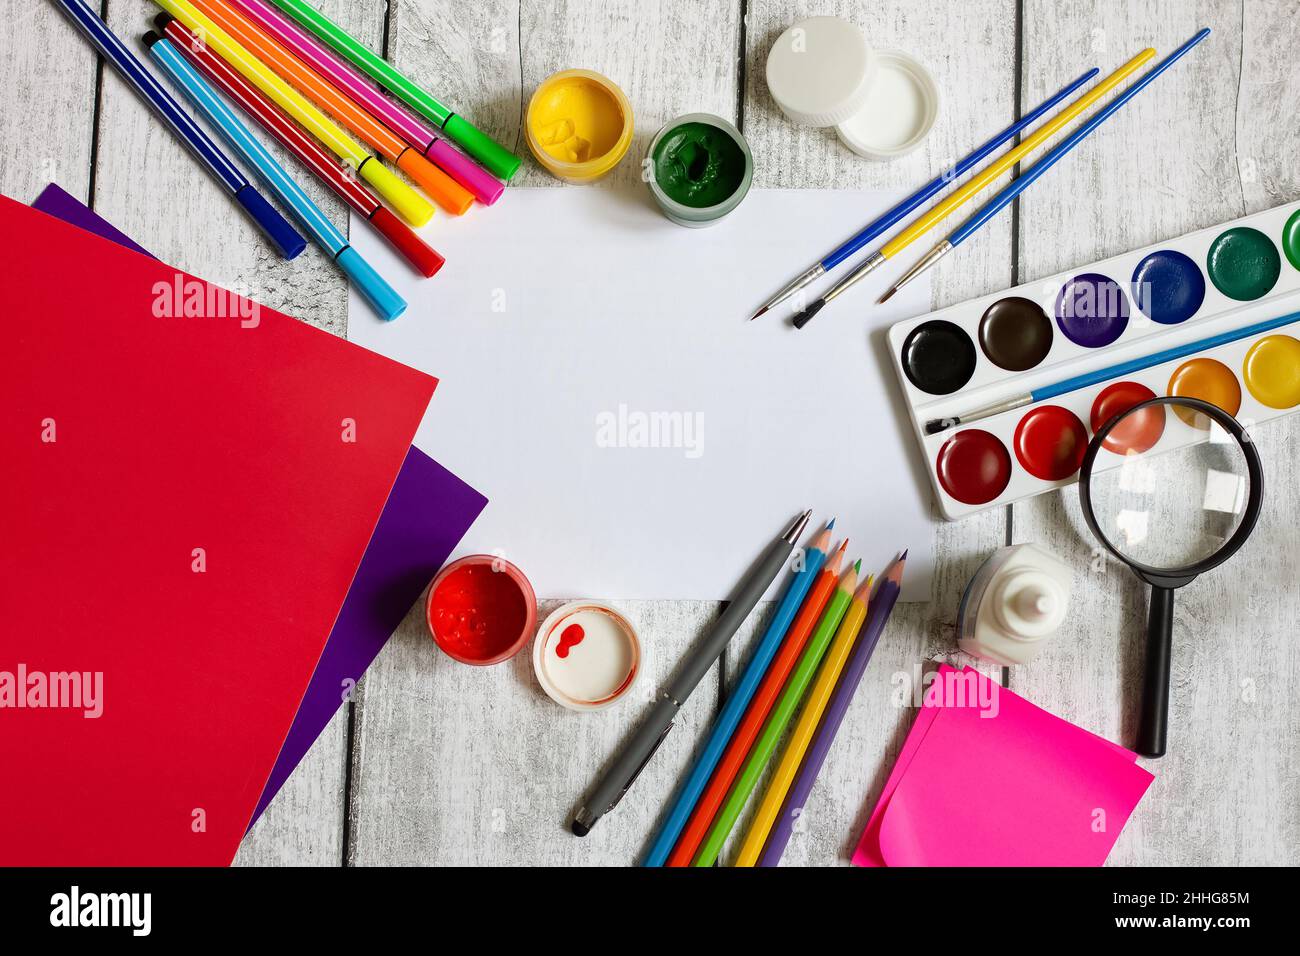 Colorful stationery on a wooden background. learning concept. copy space Stock Photo